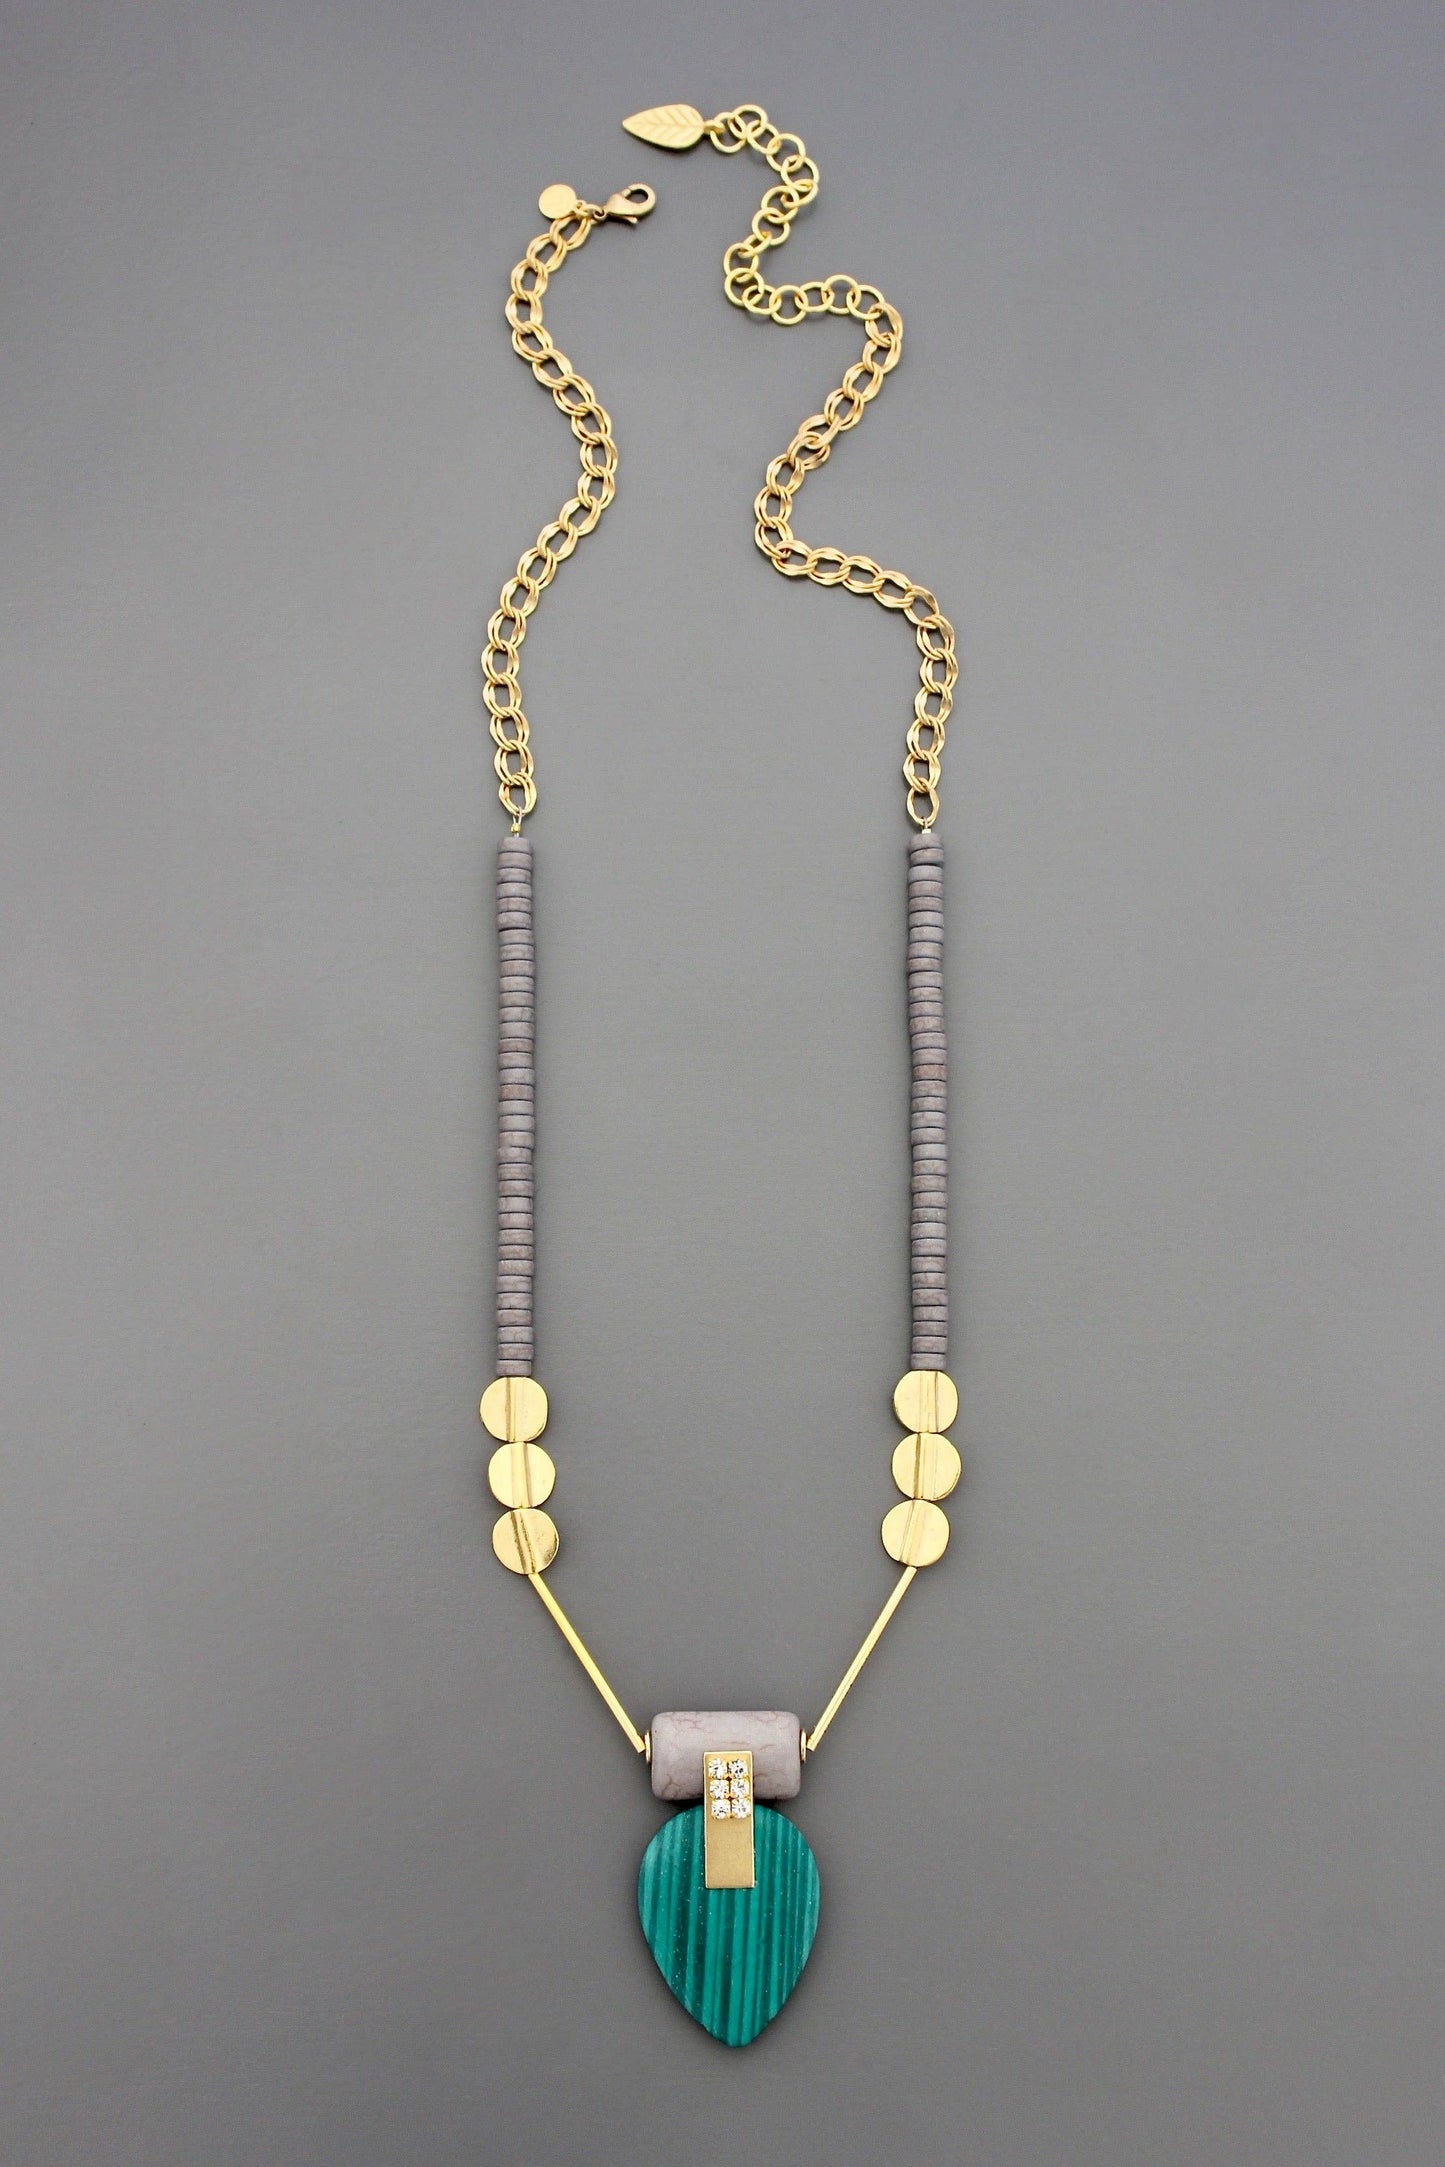 24” necklace with 18k gold plated brass clasp and double curb chain, magnesite, synthetic malachite, glass rhinestones, and brass against a grey background